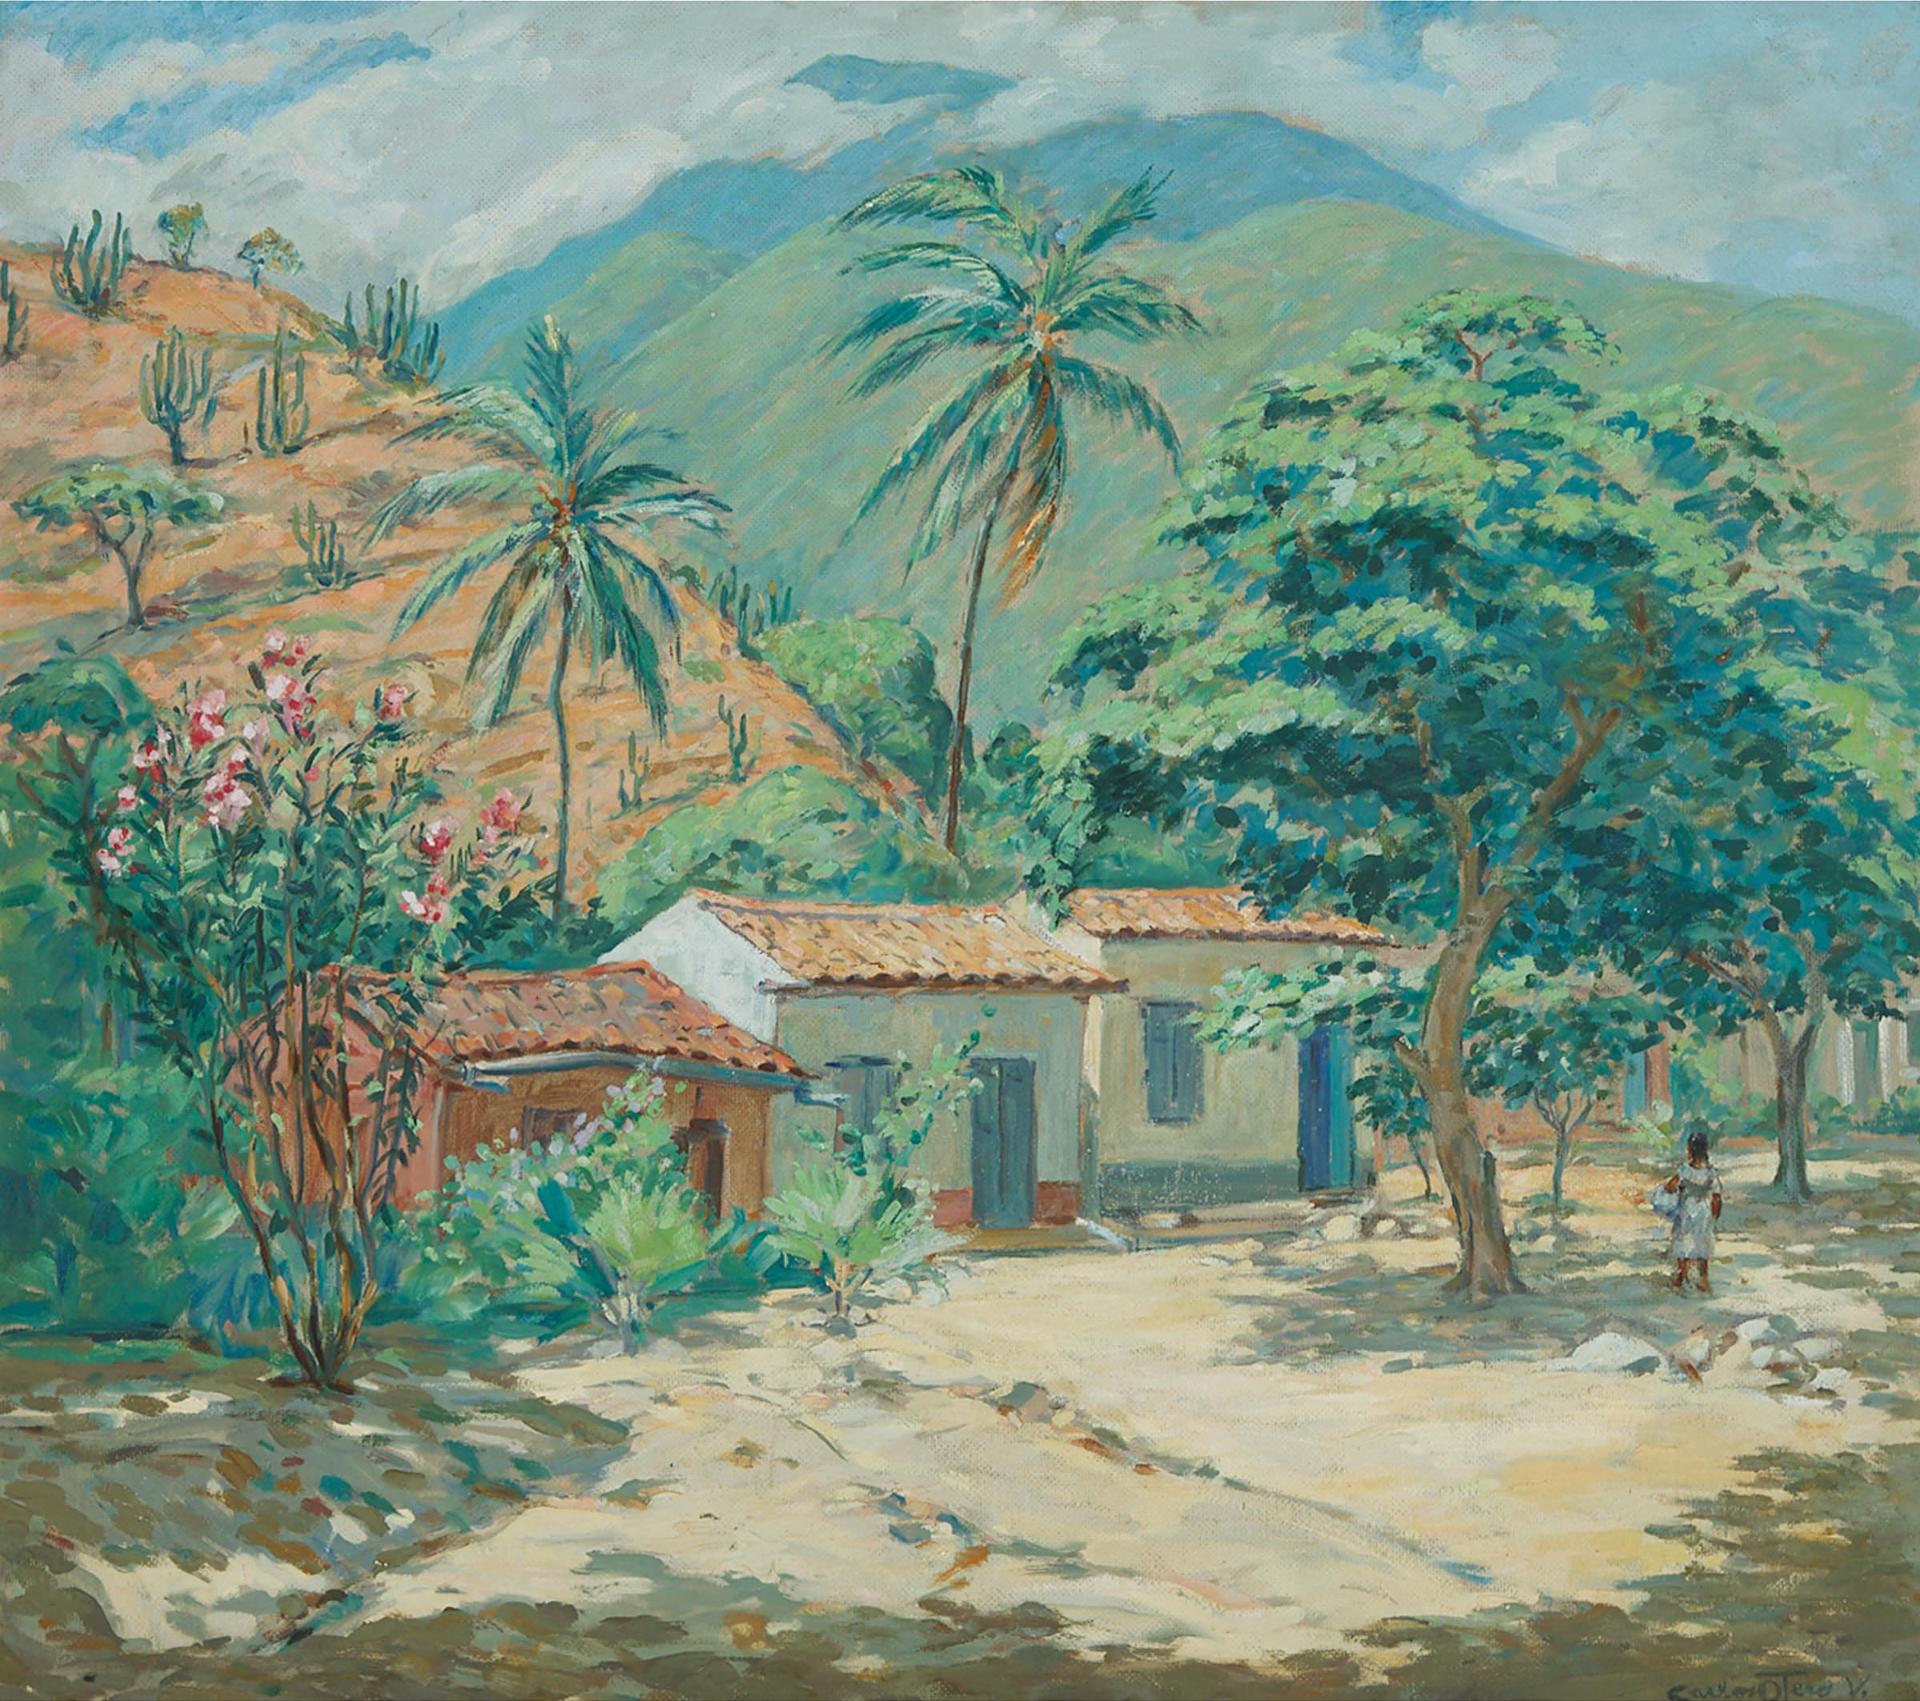 Carlos Otero (1886-1977) - Sunny Village Houses With Young Girl In The Shade, 1942